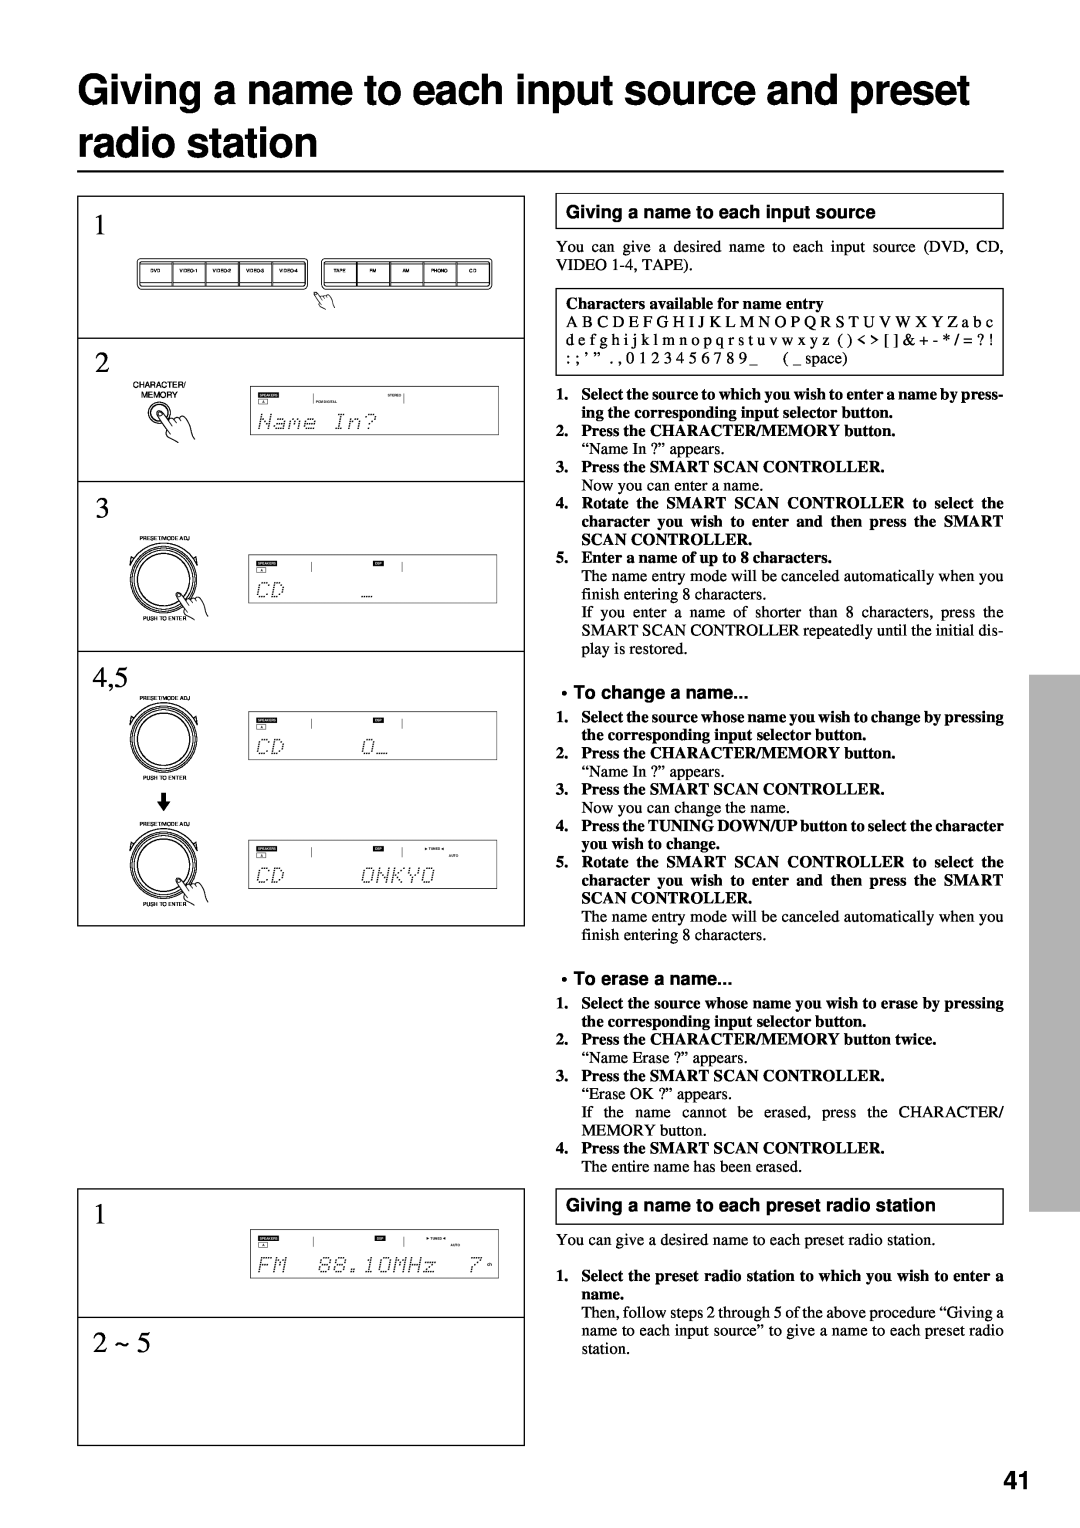 Integra DTR-7 instruction manual Giving a name to each input source, To change a name, To erase a name 